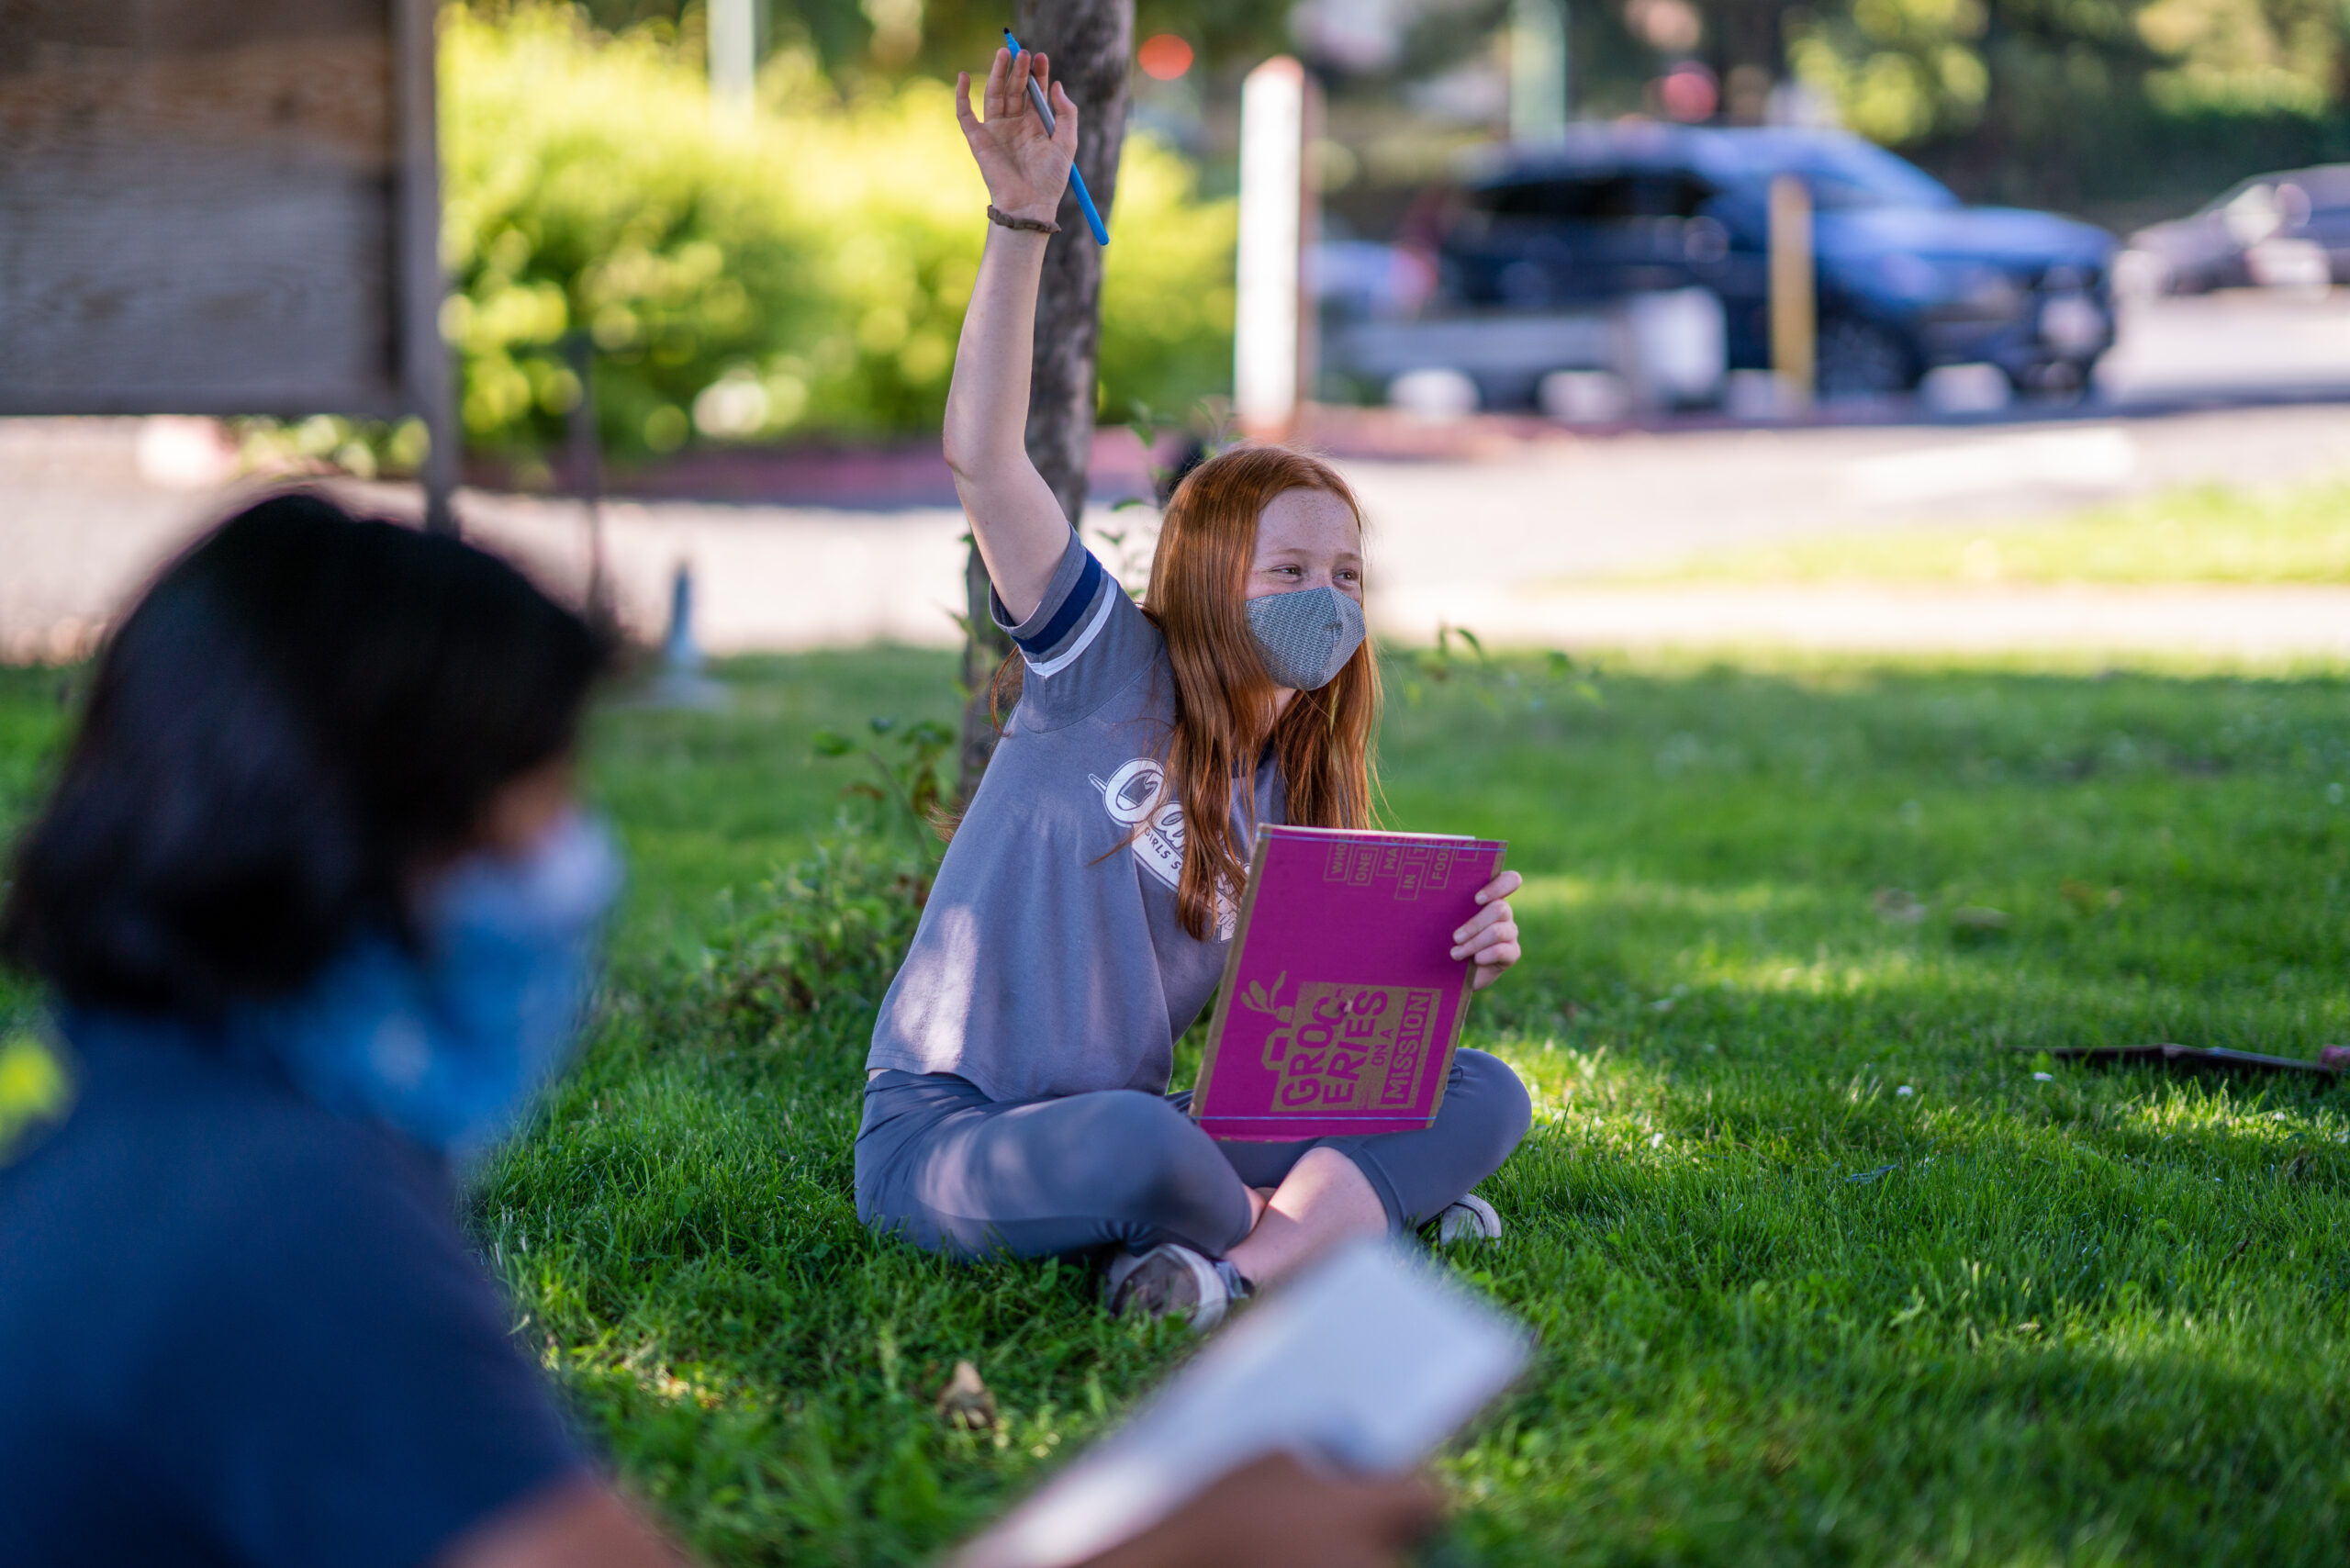 Masked student seated outdoors on a lawn raises hand